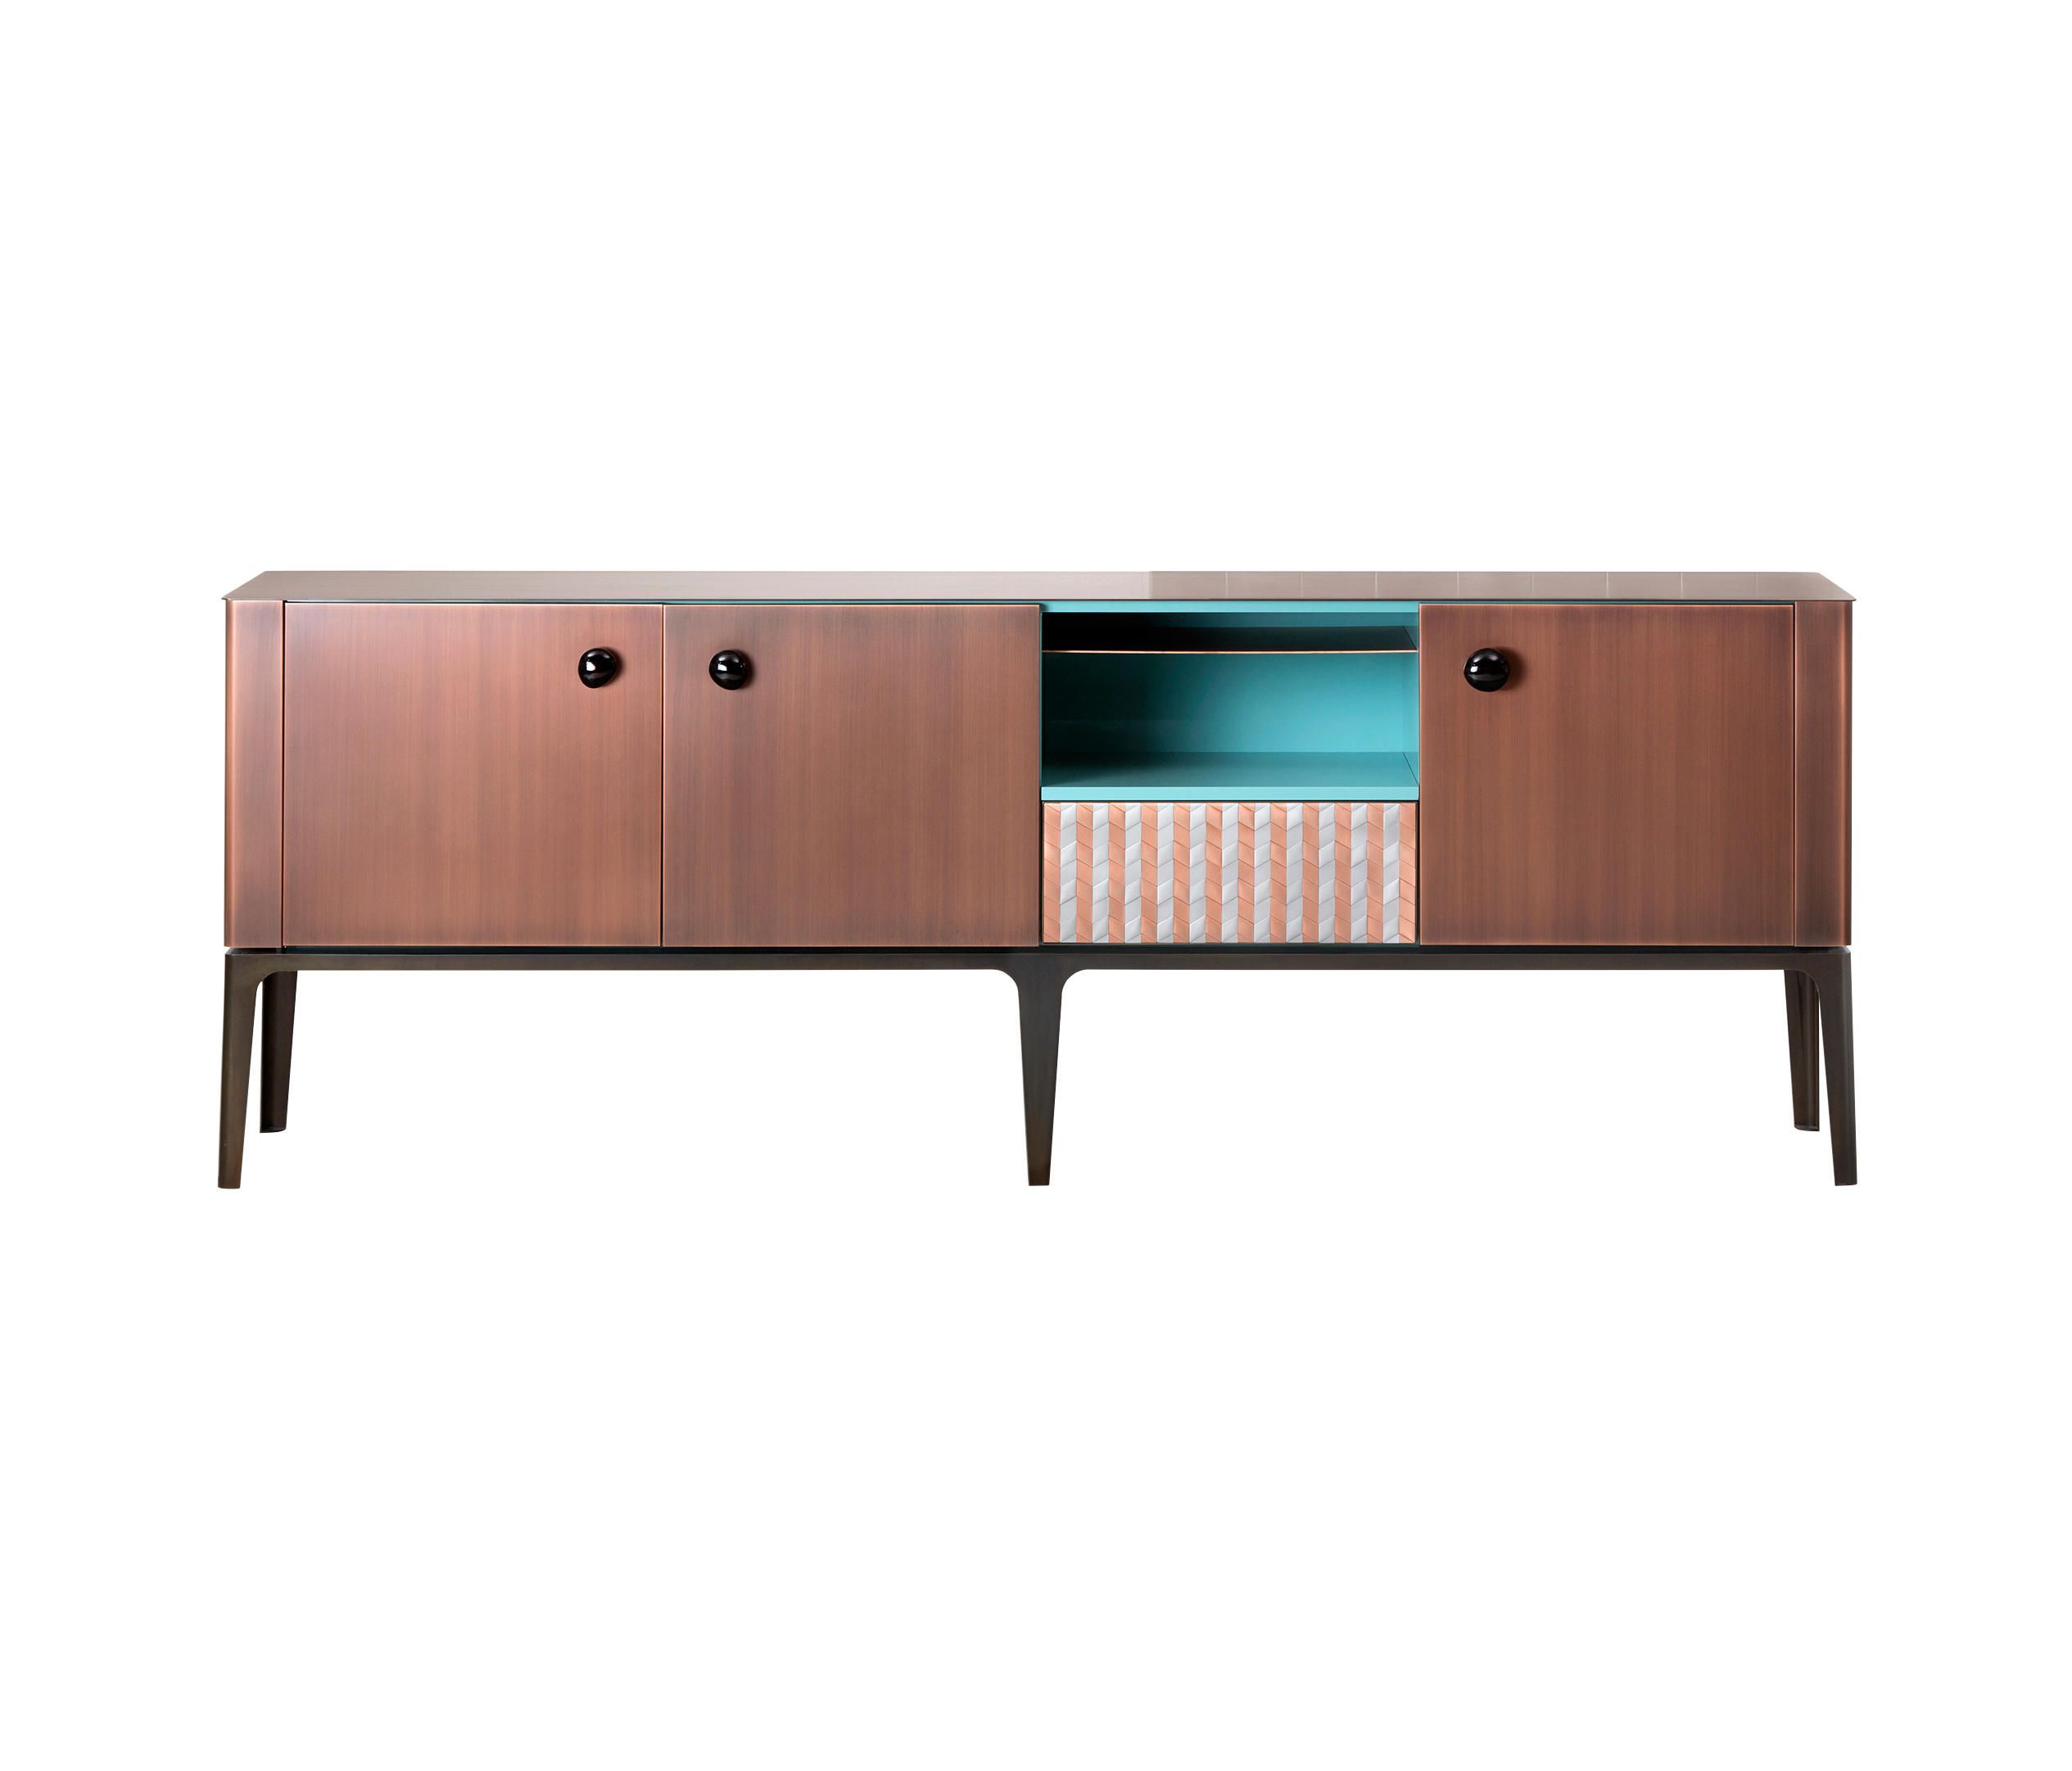 Gioiellode Castelli | Sideboards | Mobili / Furniture Pertaining To Castelli Sideboards (View 11 of 30)